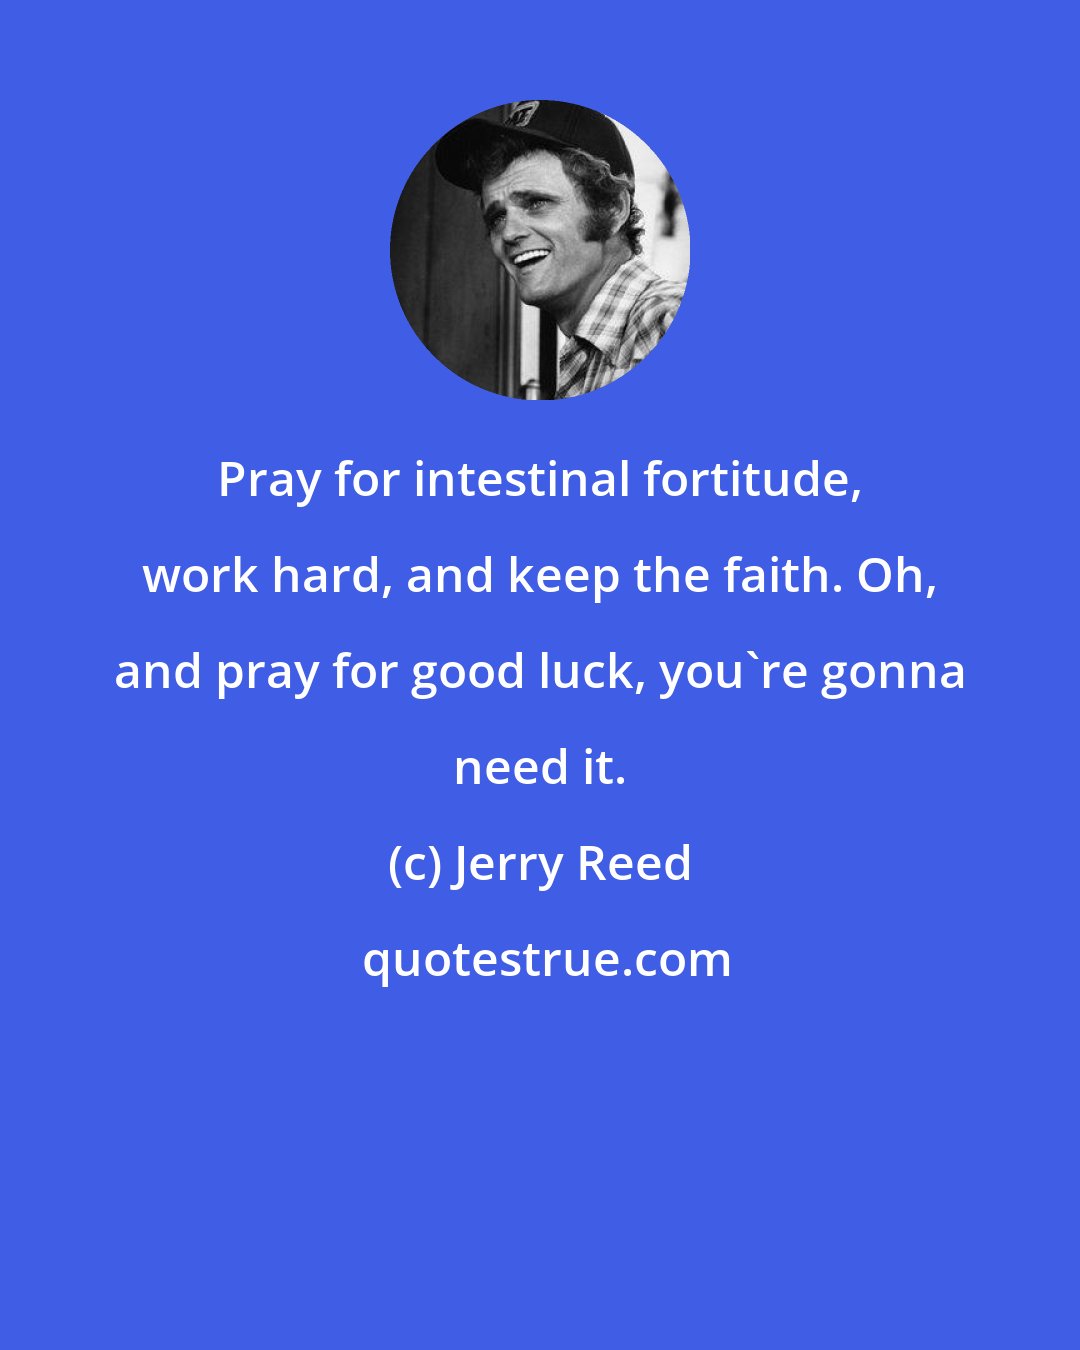 Jerry Reed: Pray for intestinal fortitude, work hard, and keep the faith. Oh, and pray for good luck, you're gonna need it.